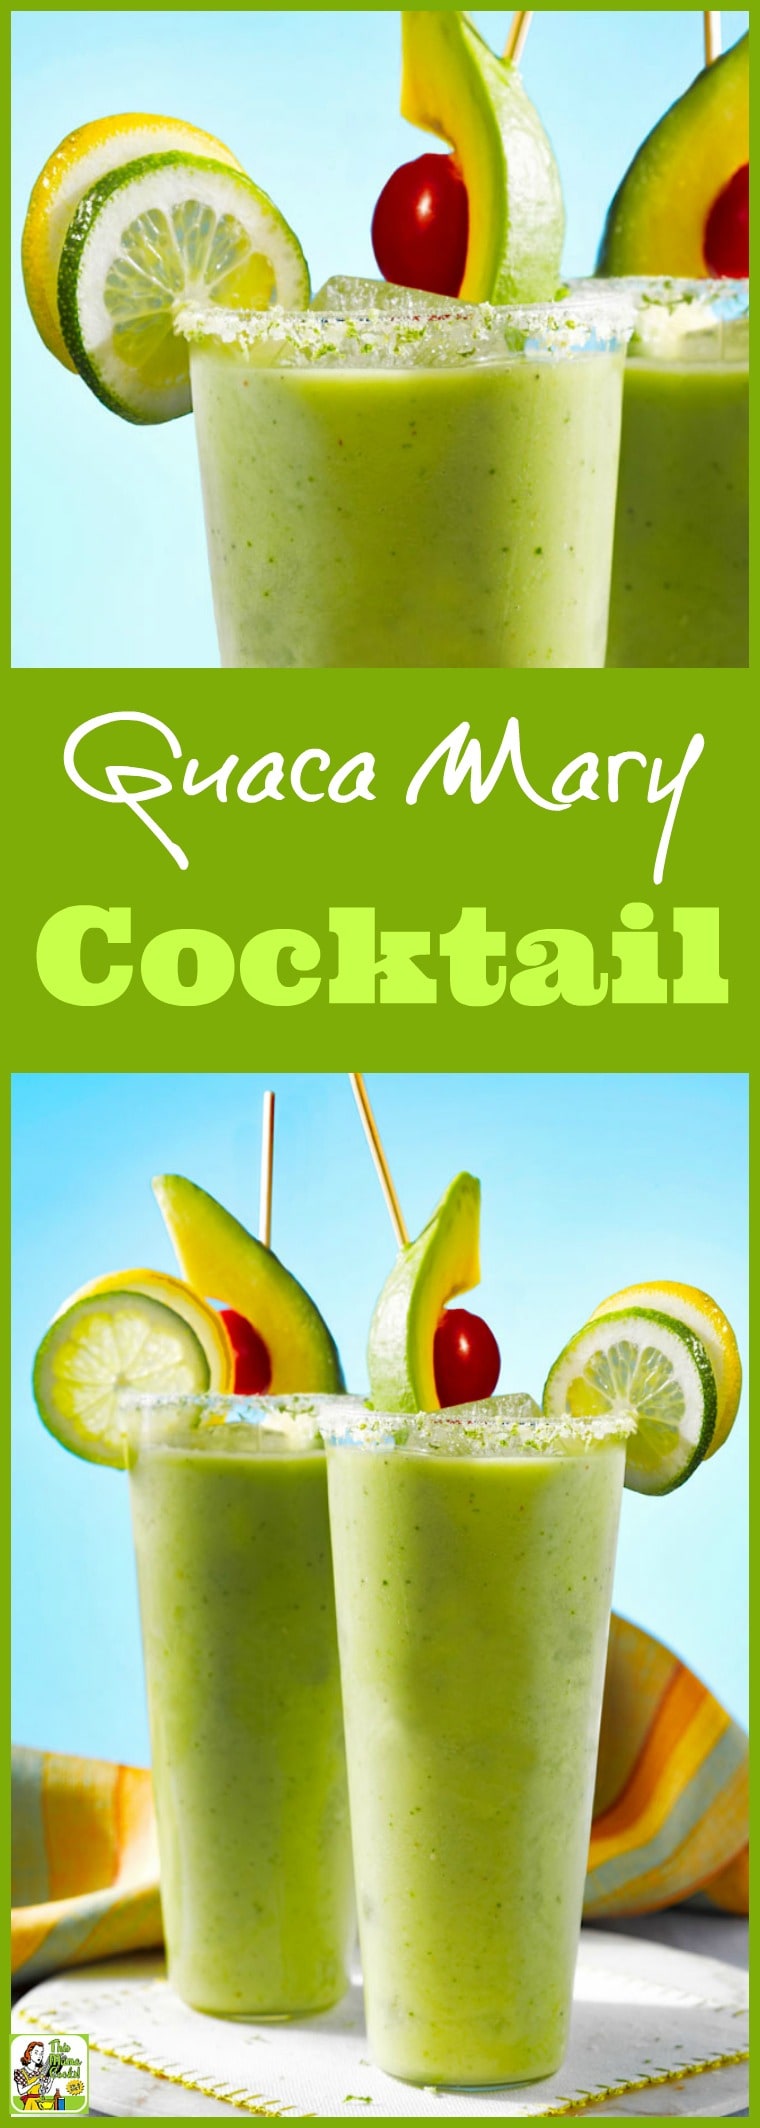 Looking for new Mother's Day drink ideas? Try a Guaca Mary Cocktail